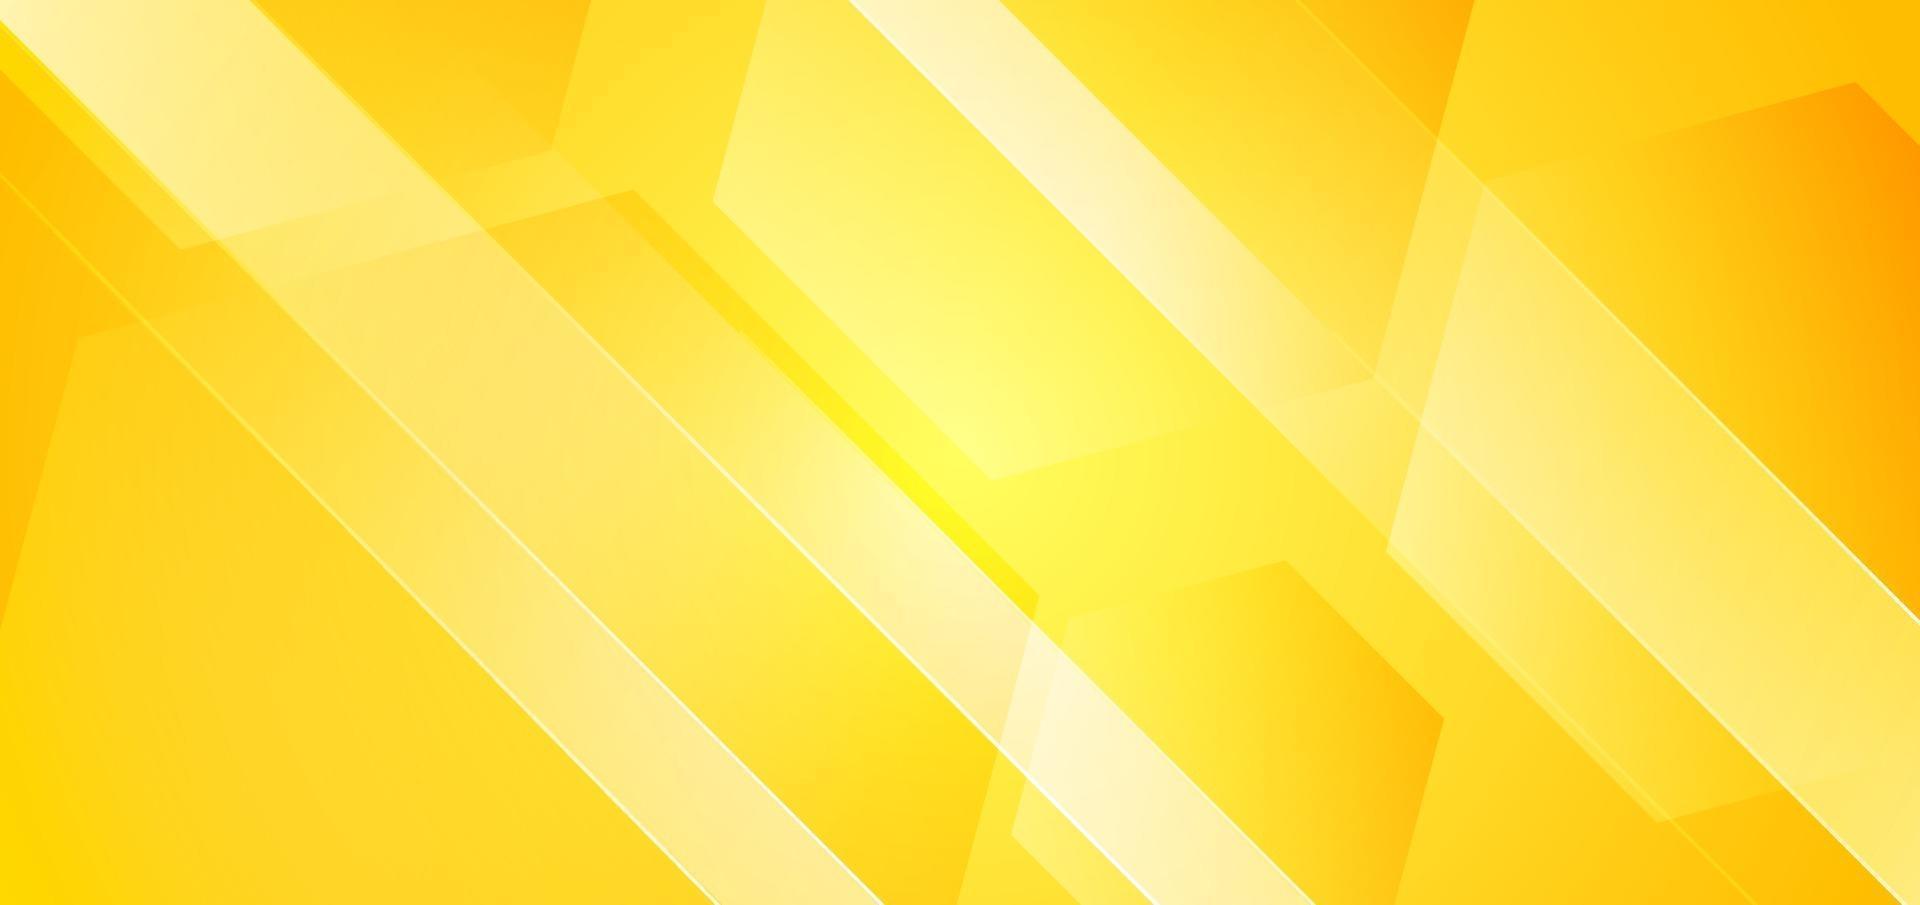 Abstract geometric hexagons yellow background with diagonal striped lines. vector